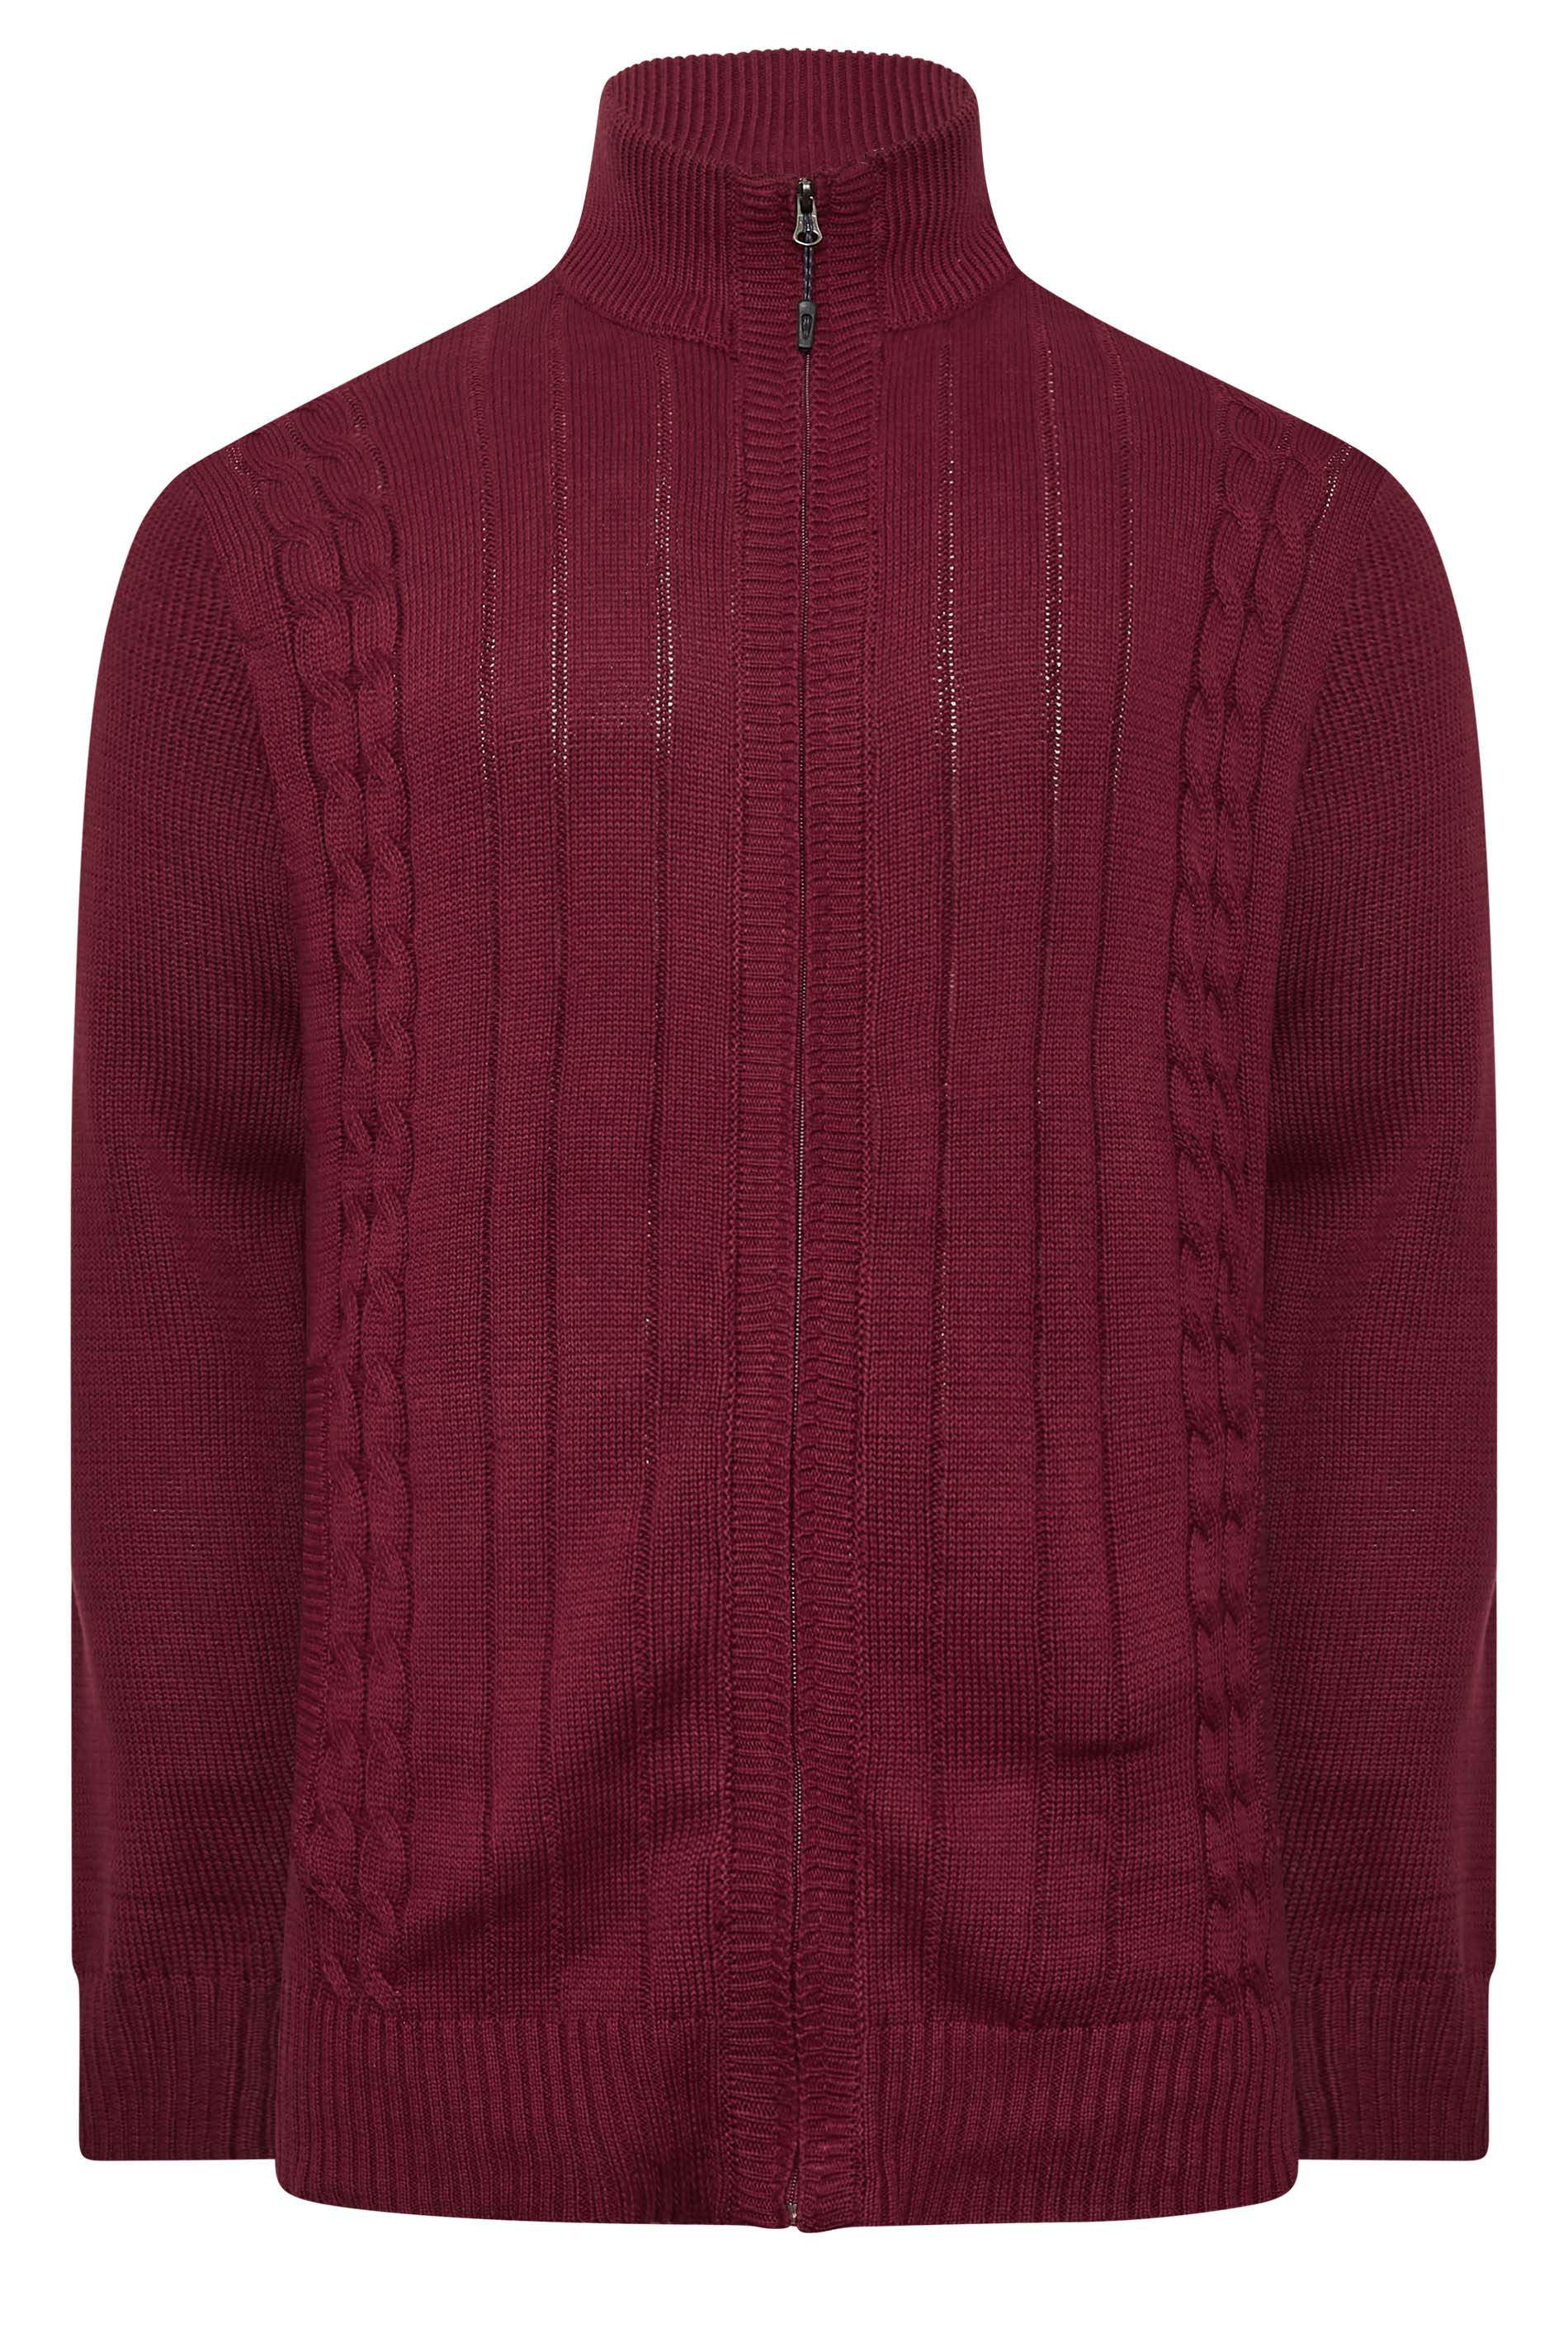 KAM Big & Tall Red Cable Knit Cardigan | BadRhino 3